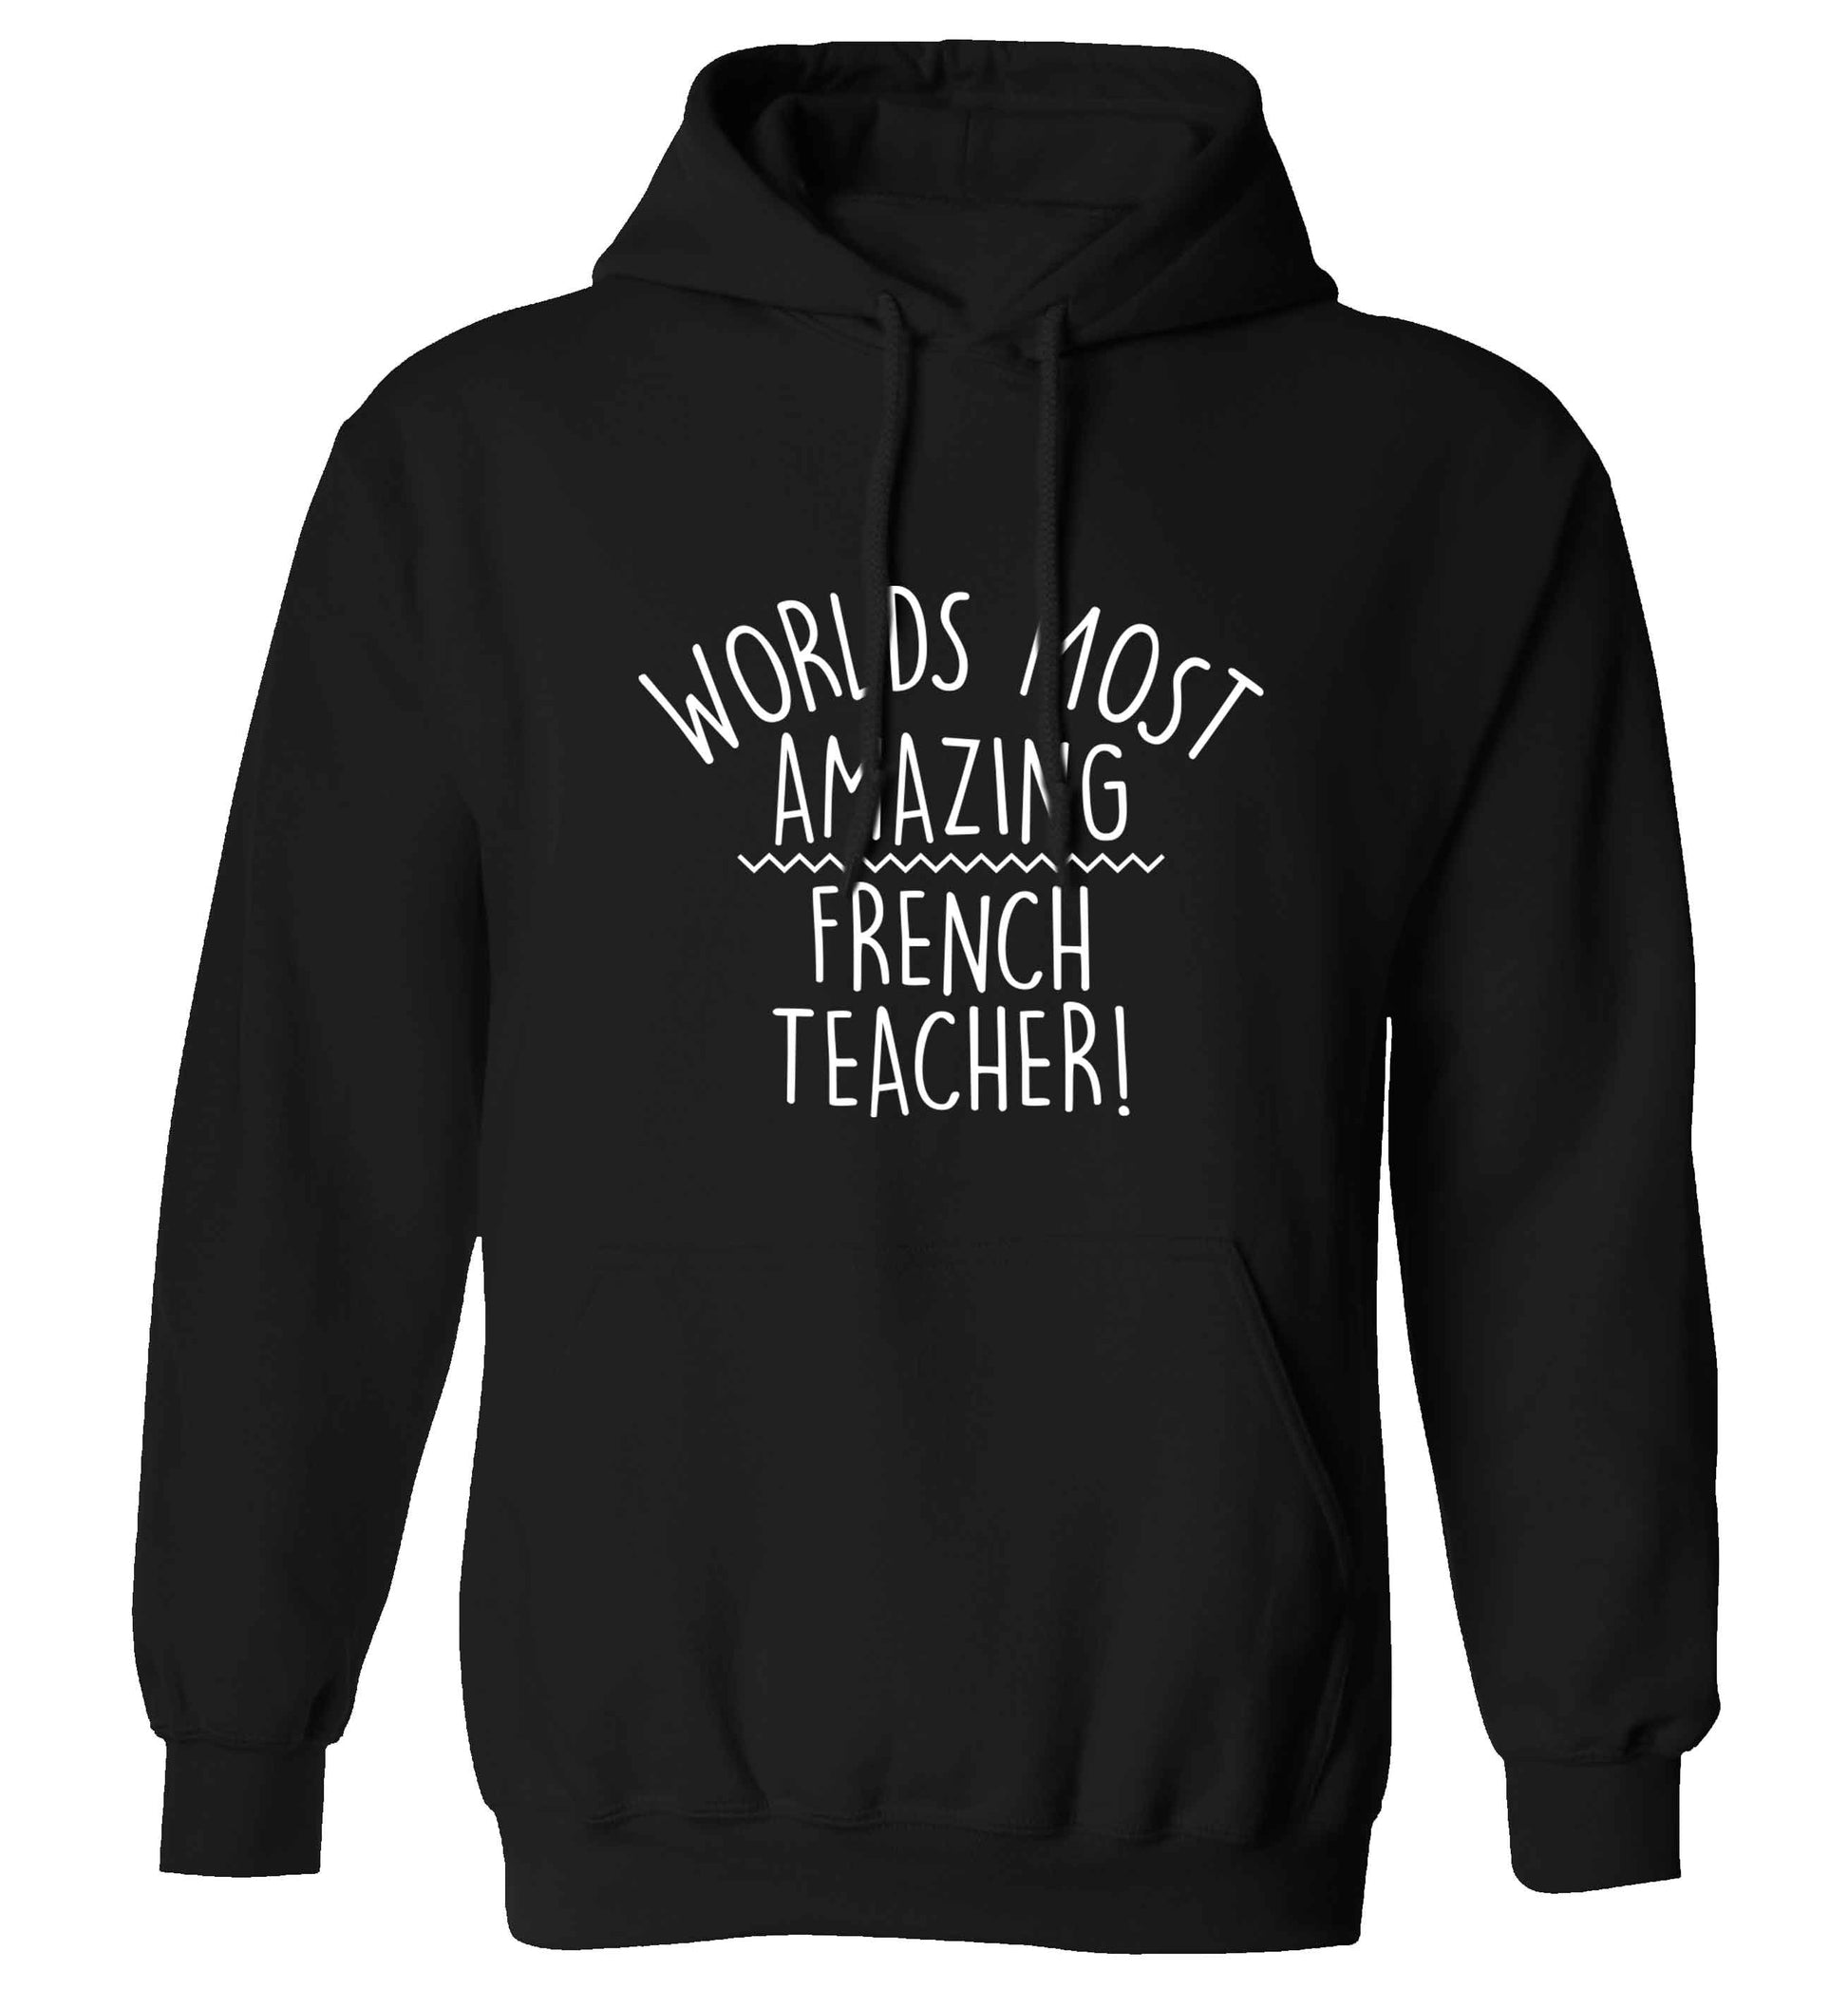 Worlds most amazing French teacher adults unisex black hoodie 2XL